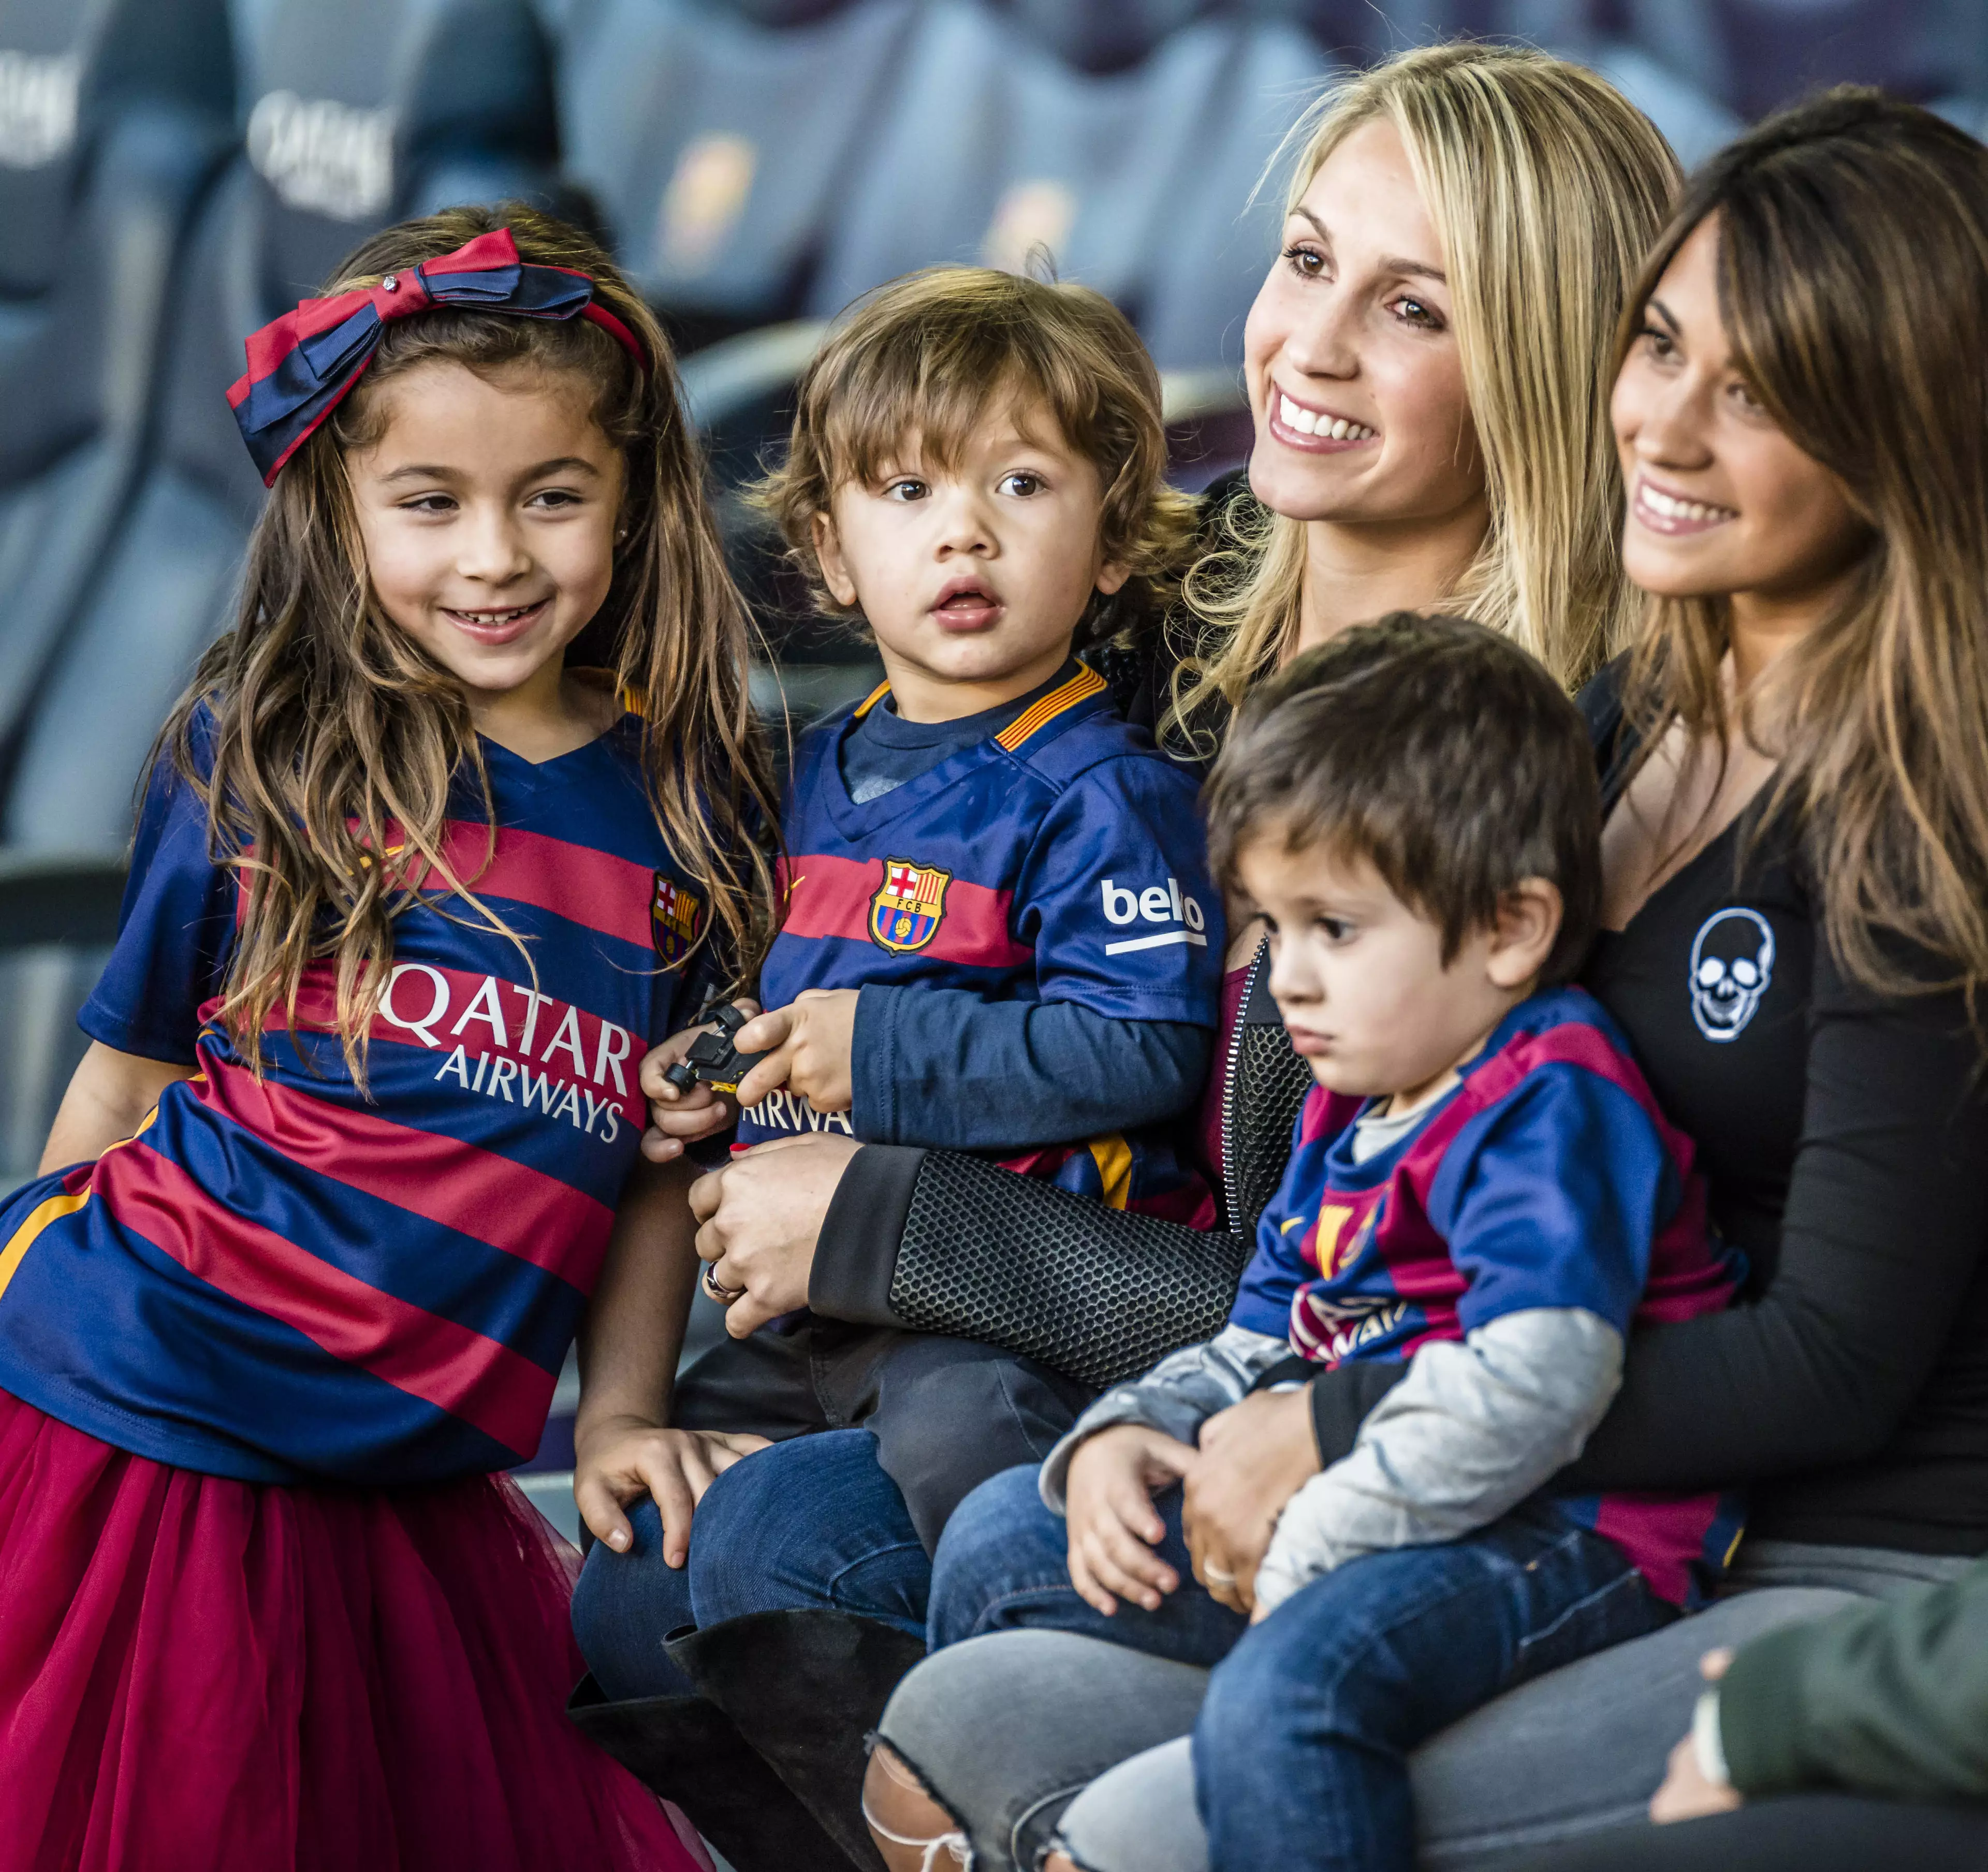 The Messi family watching 'dad.' Image: PA Images